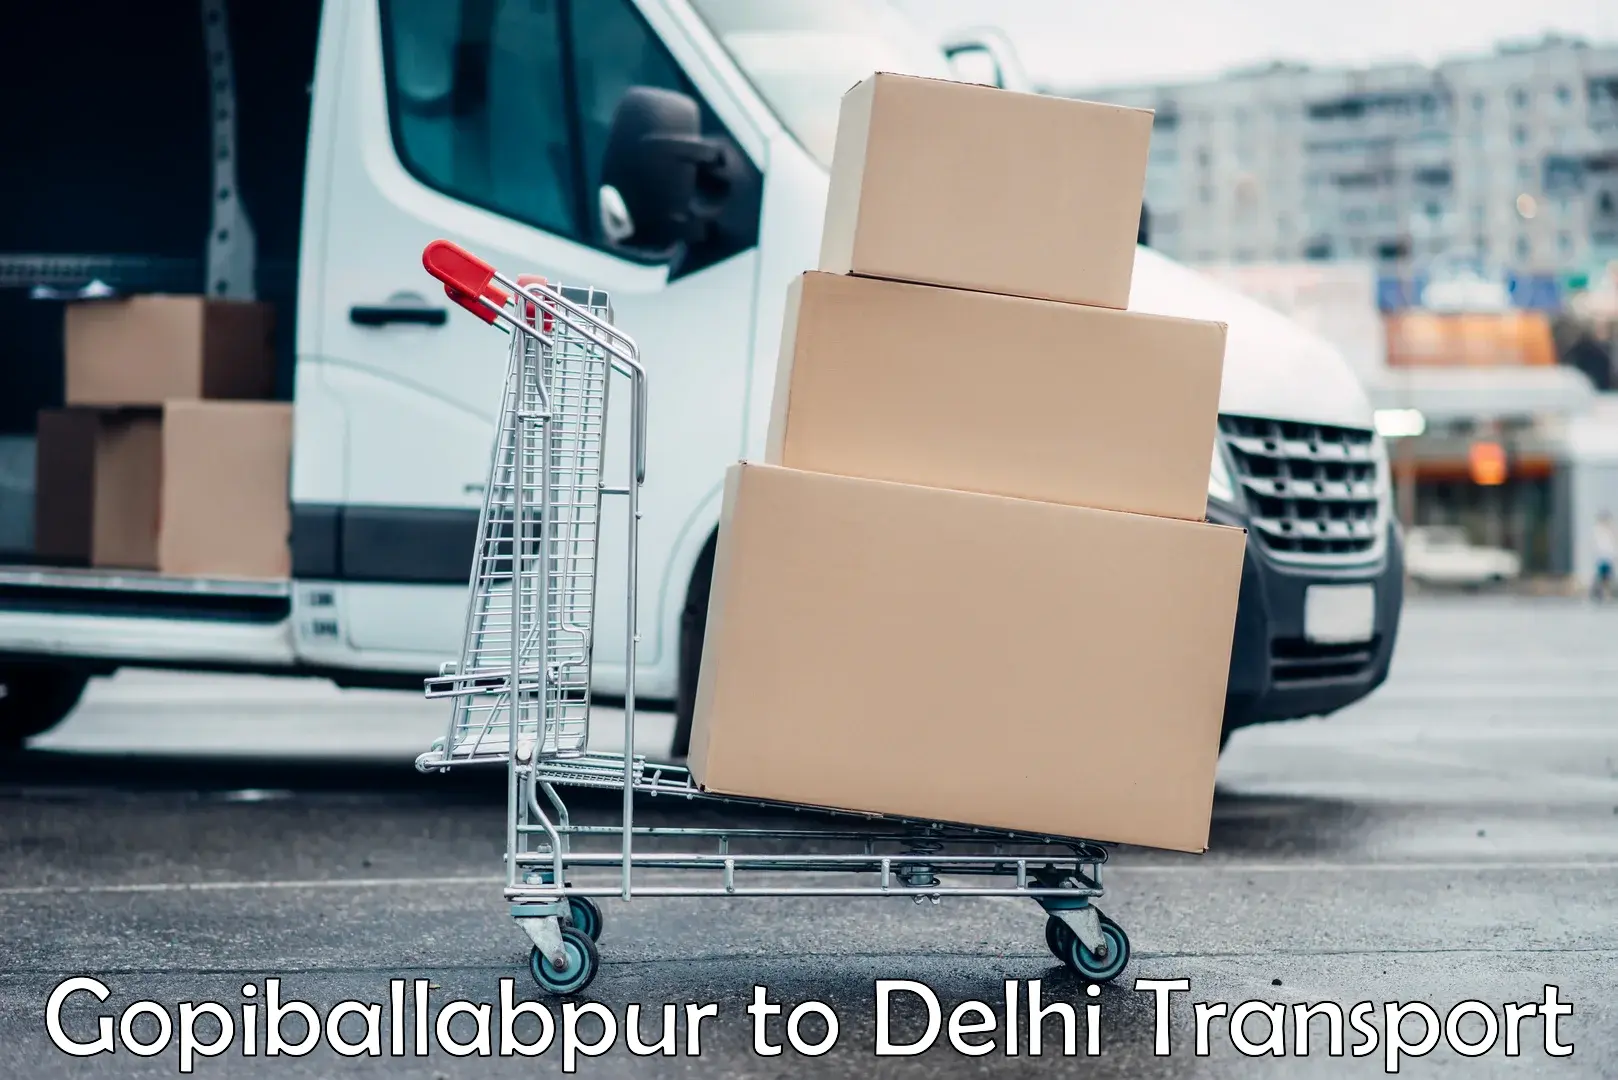 Part load transport service in India Gopiballabpur to East Delhi